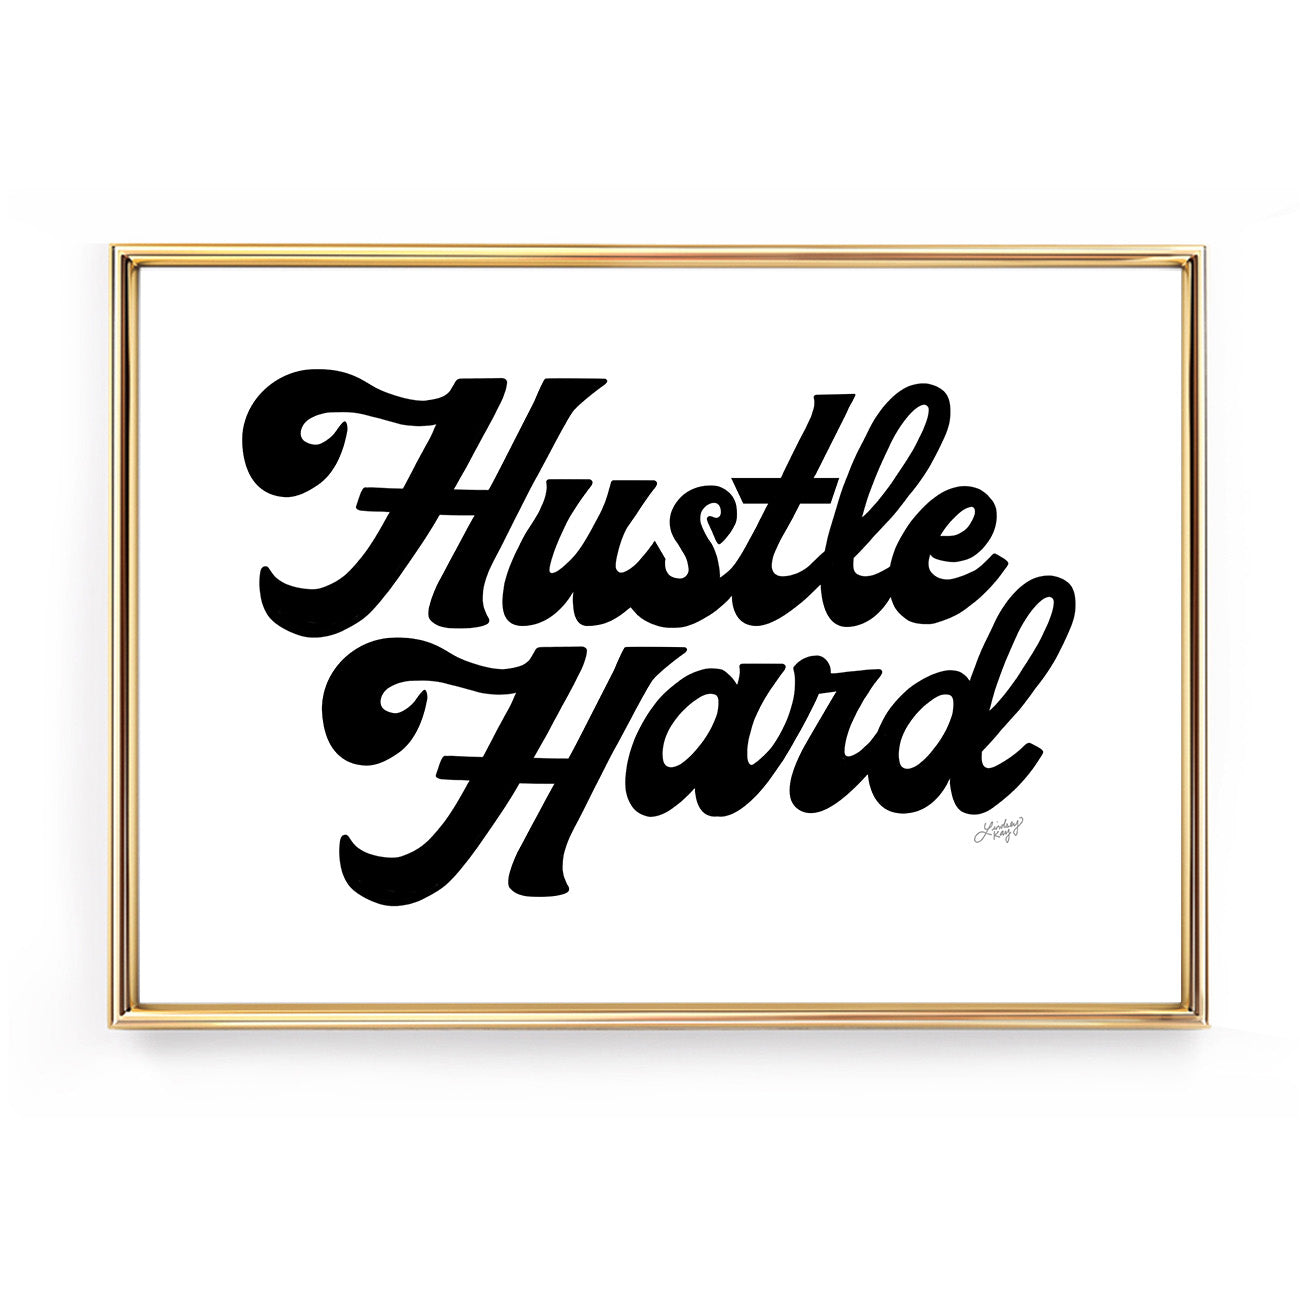 hustle hard quote hand lettering black and white retro poster motivational wall art print lindsey kay collective